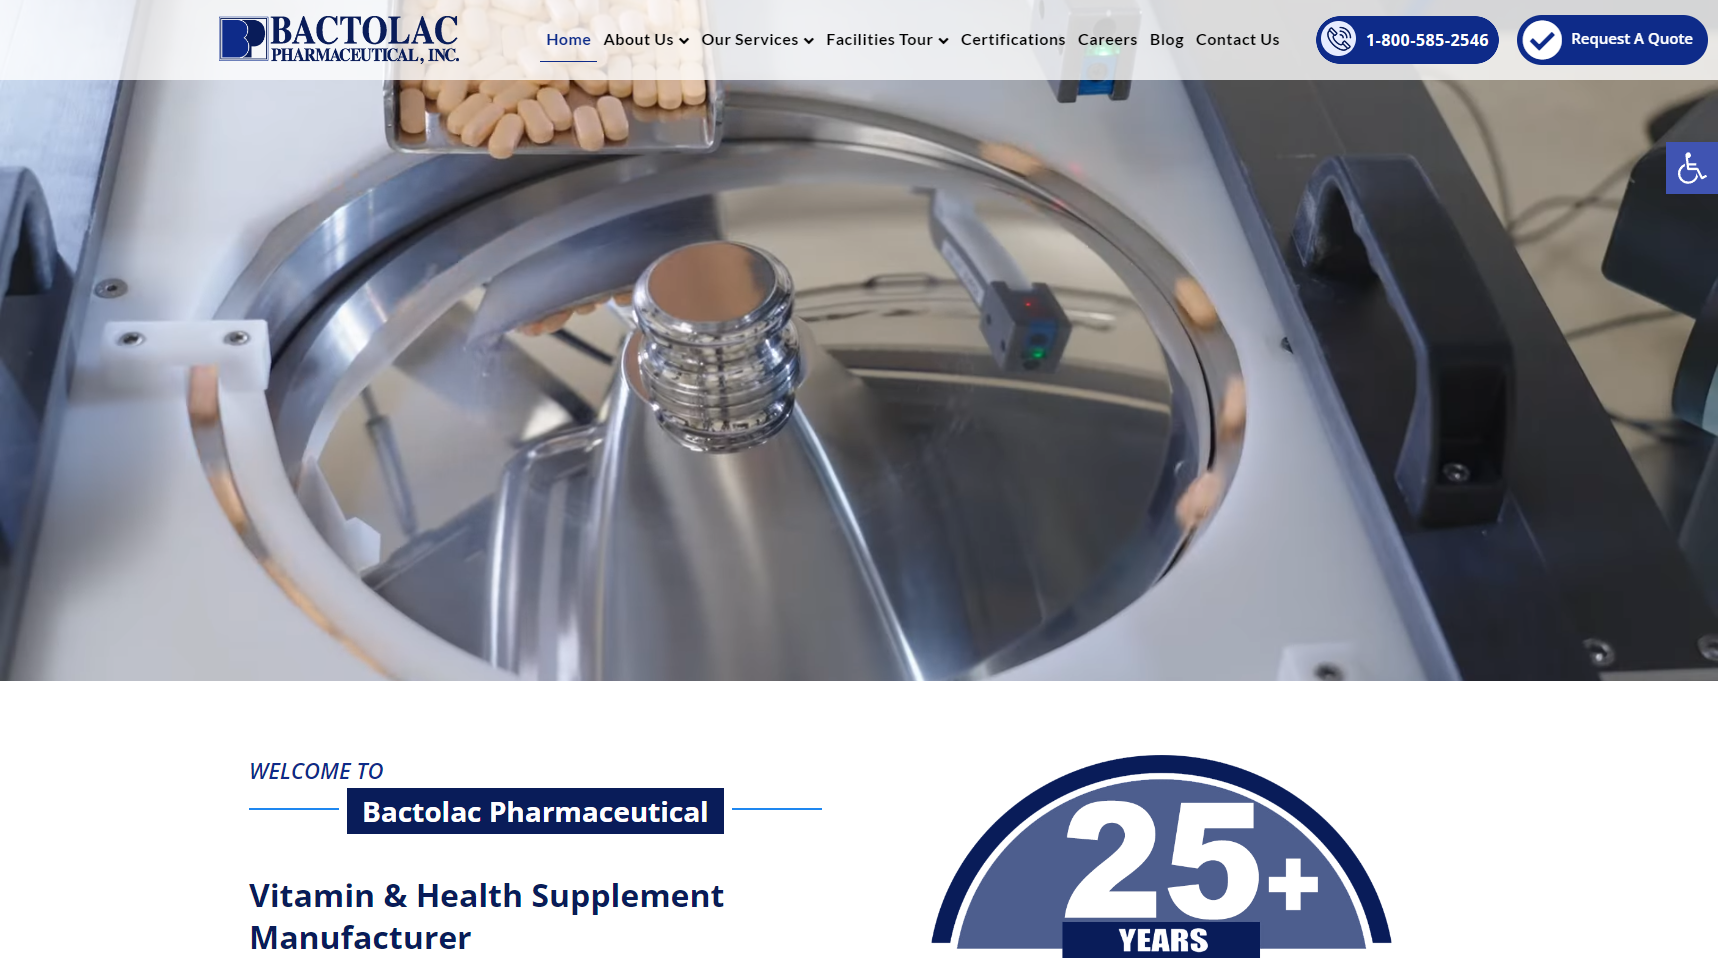 Bactolac Pharmaceutical - Food Supplement Manufacturer